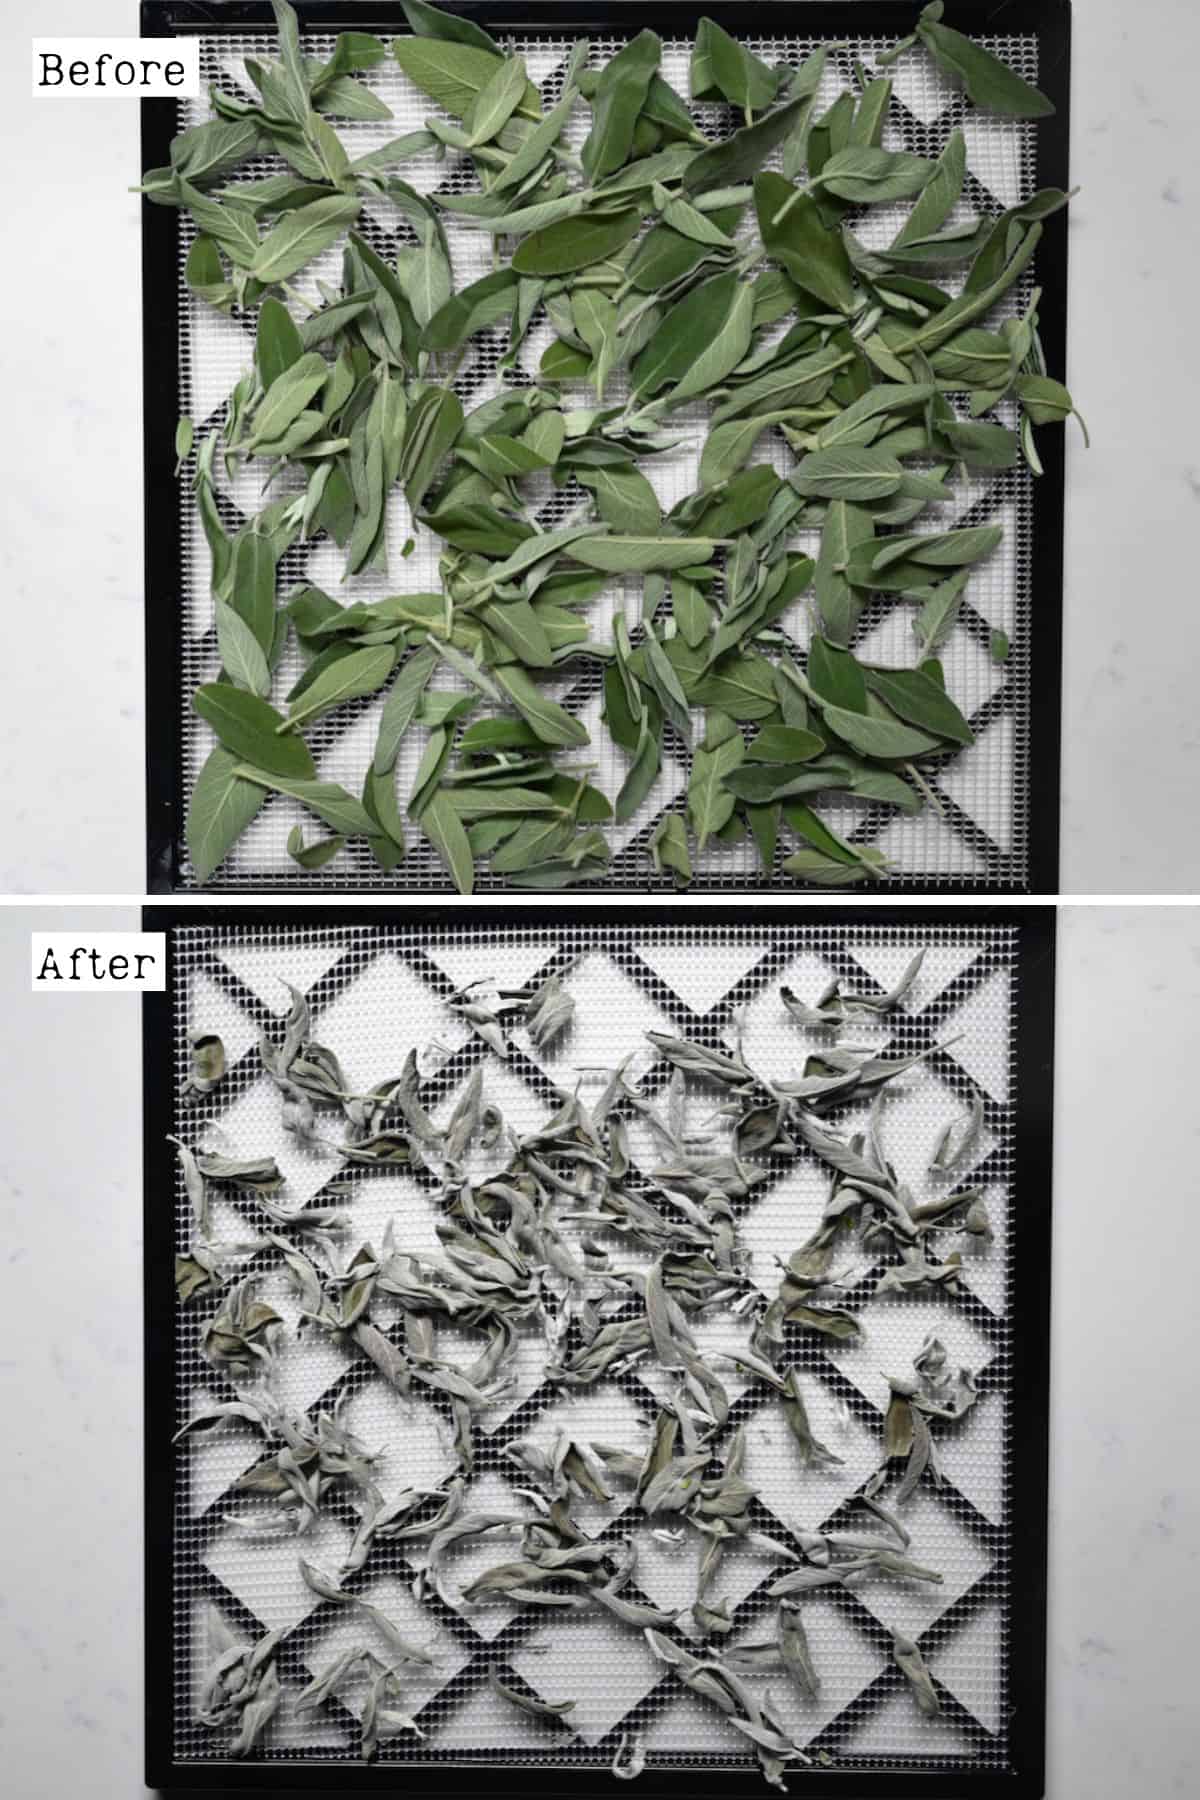 Before and after drying sage